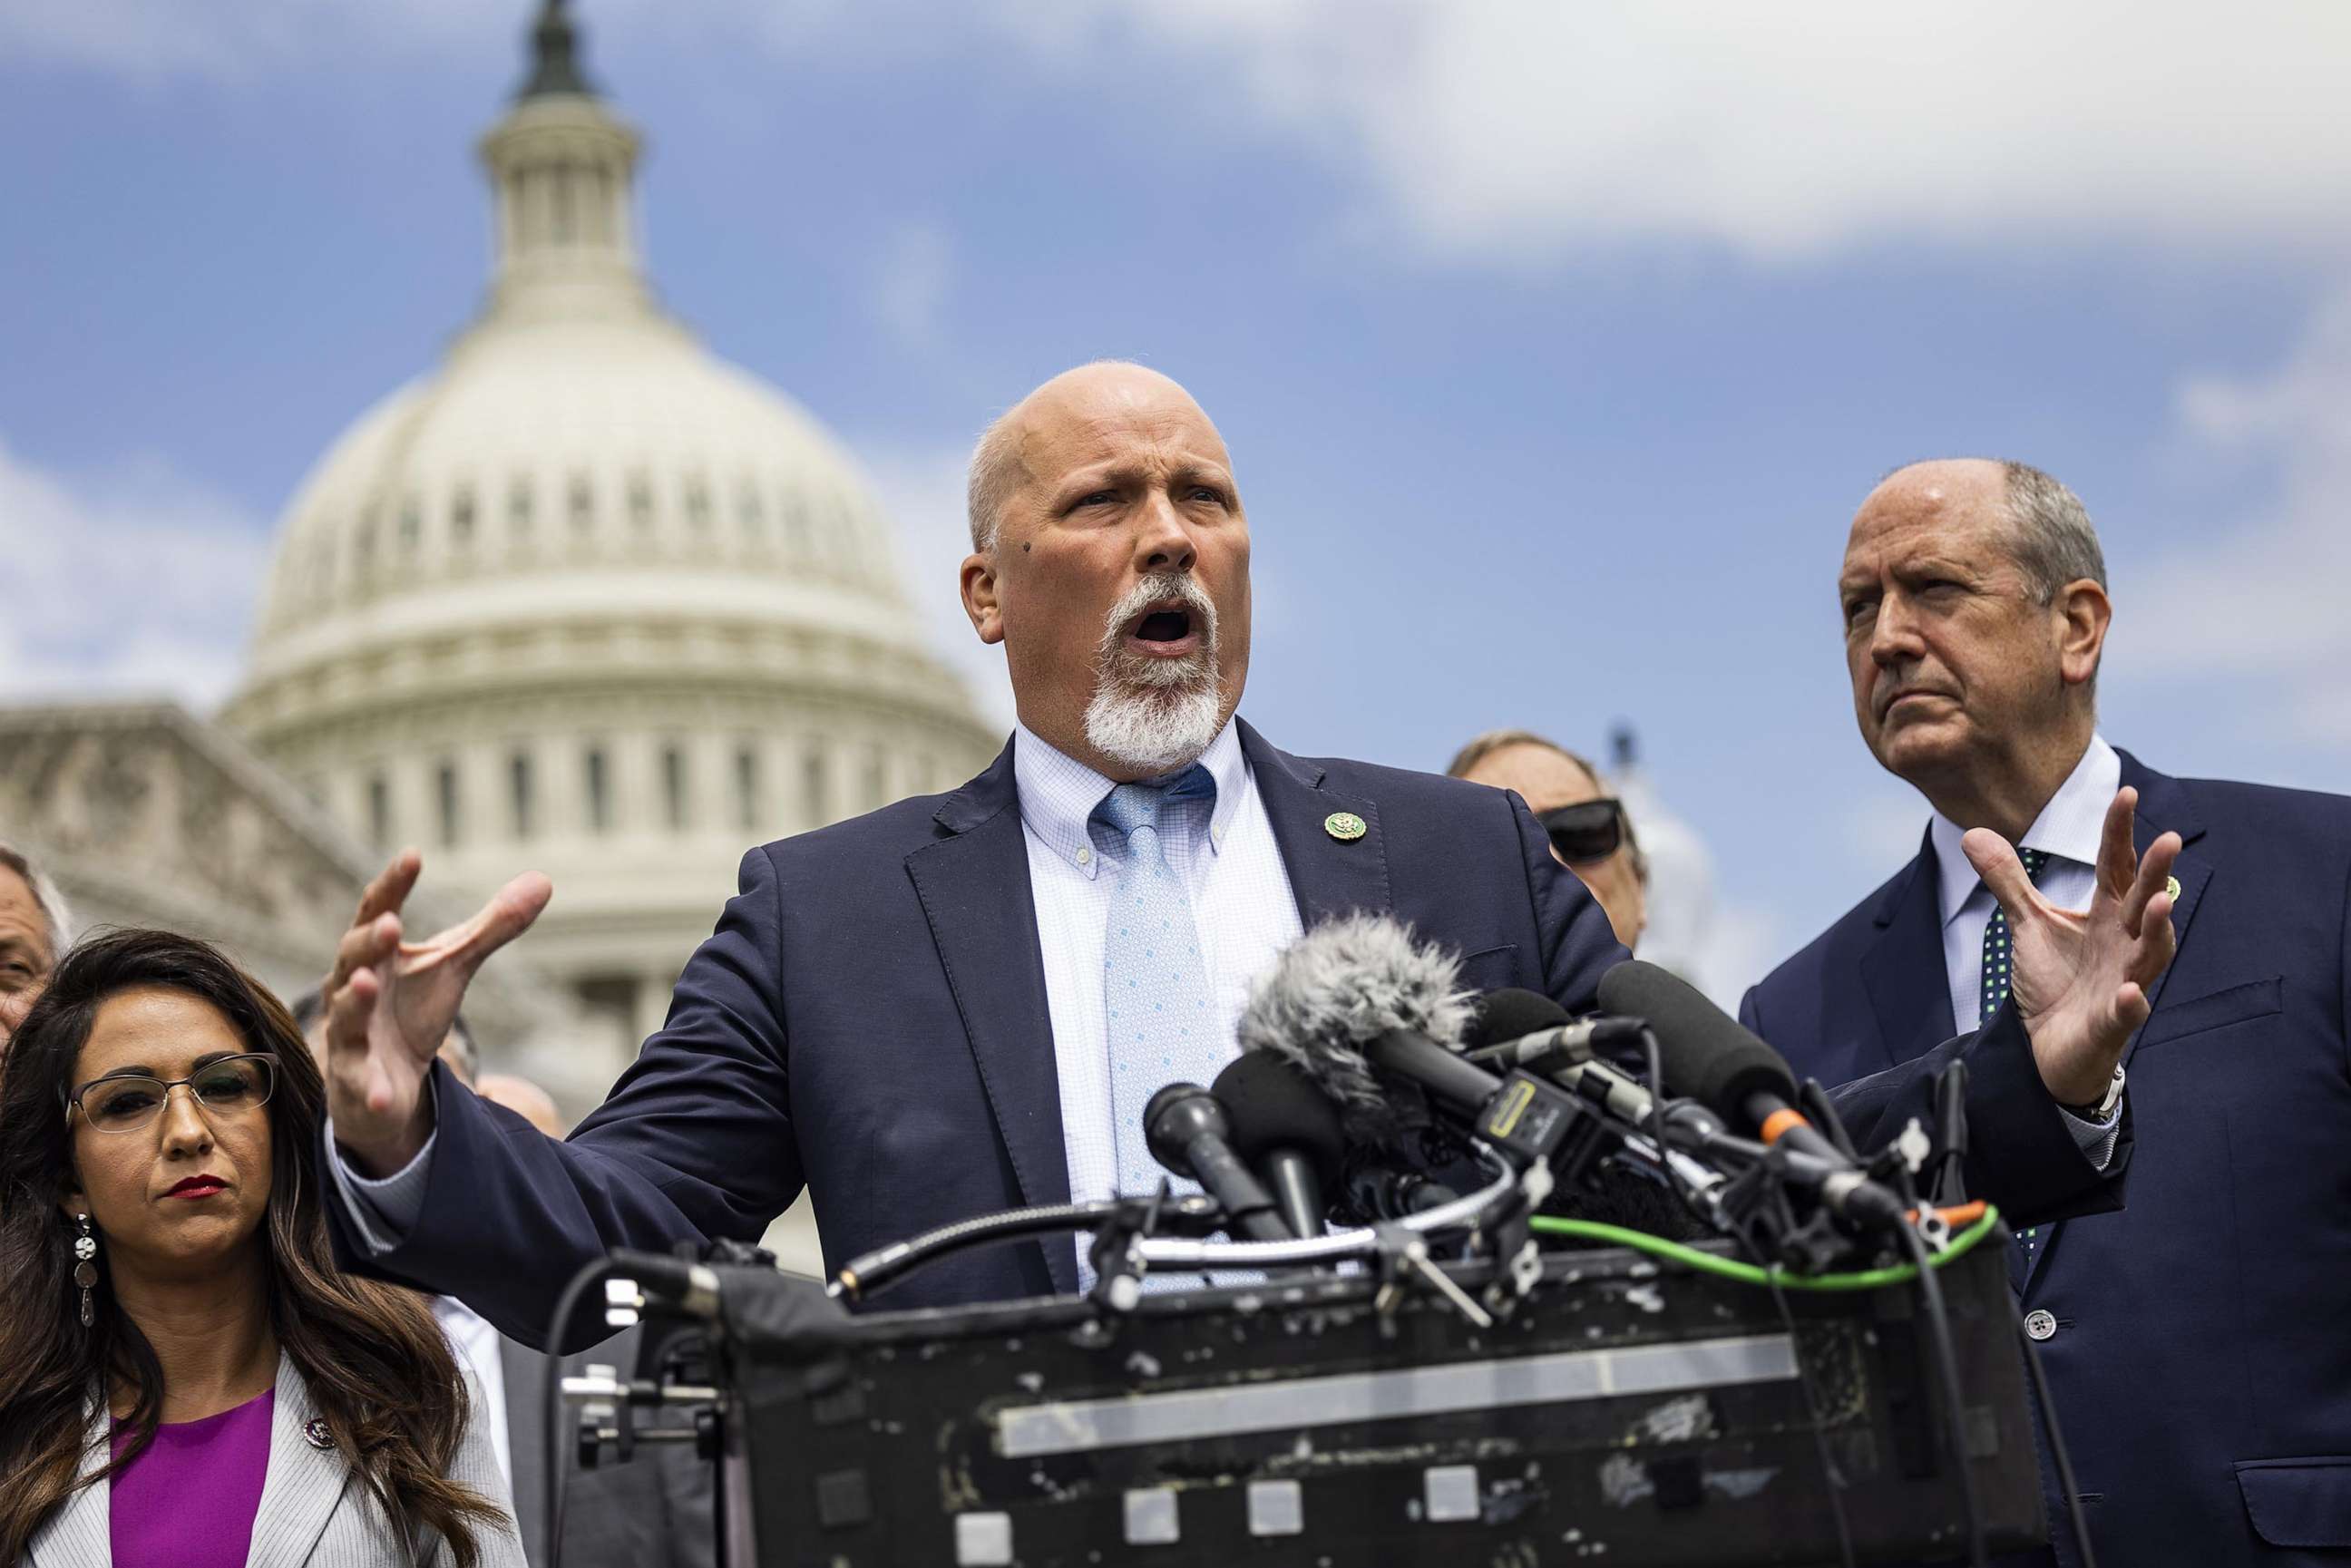 PHOTO: Rep. Chip Roy speaks about his opposition to the tentative agreement between the White House and House Speaker Kevin McCarthy to raise the debt limit, outside the US Capitol in Washington, D.C., on May 30, 2023.